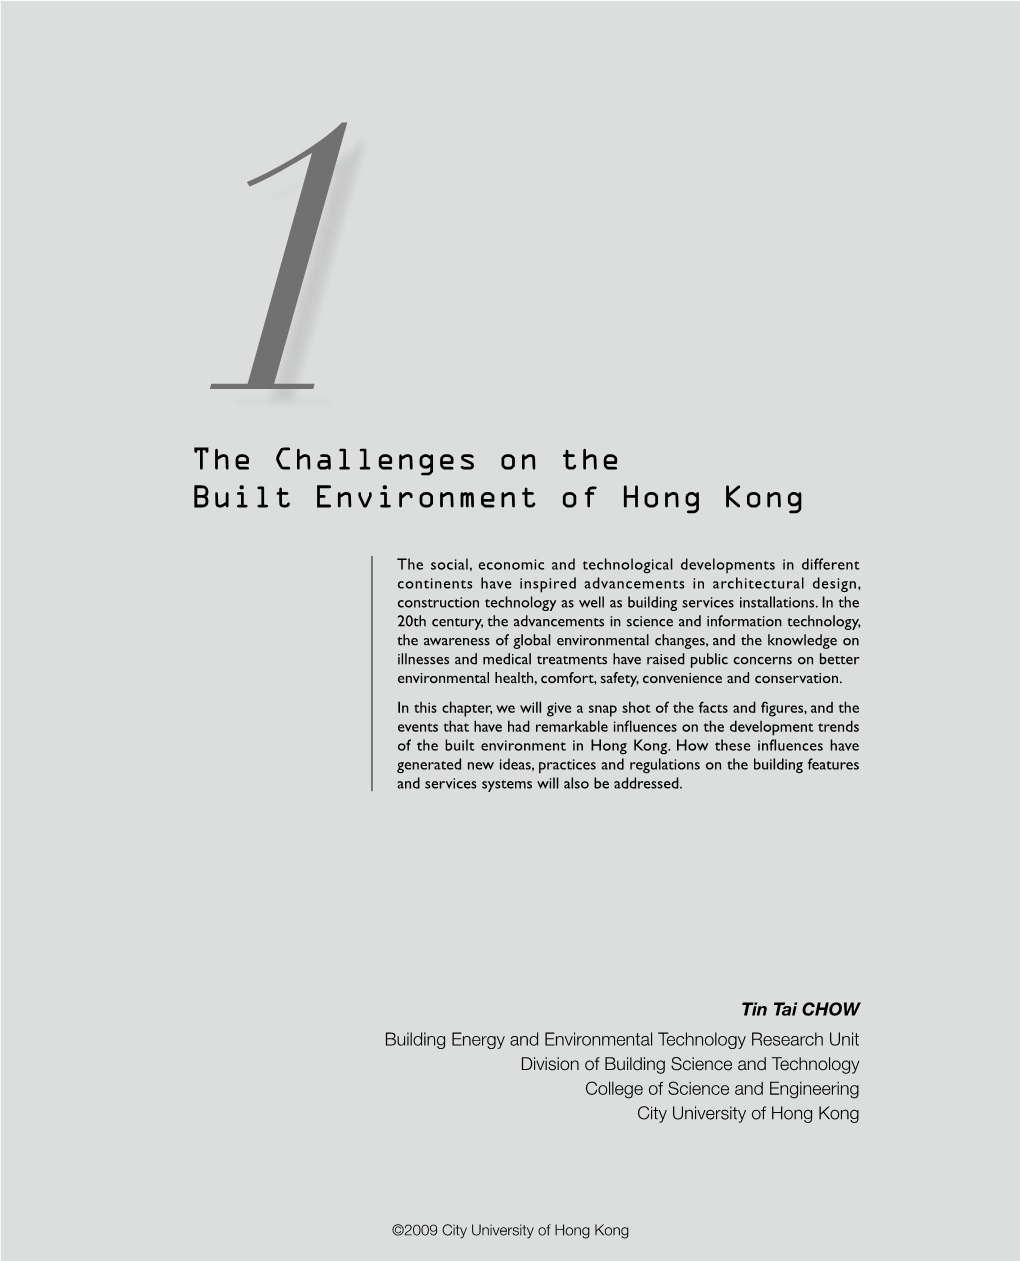 1The Challenges on the Built Environment of Hong Kong